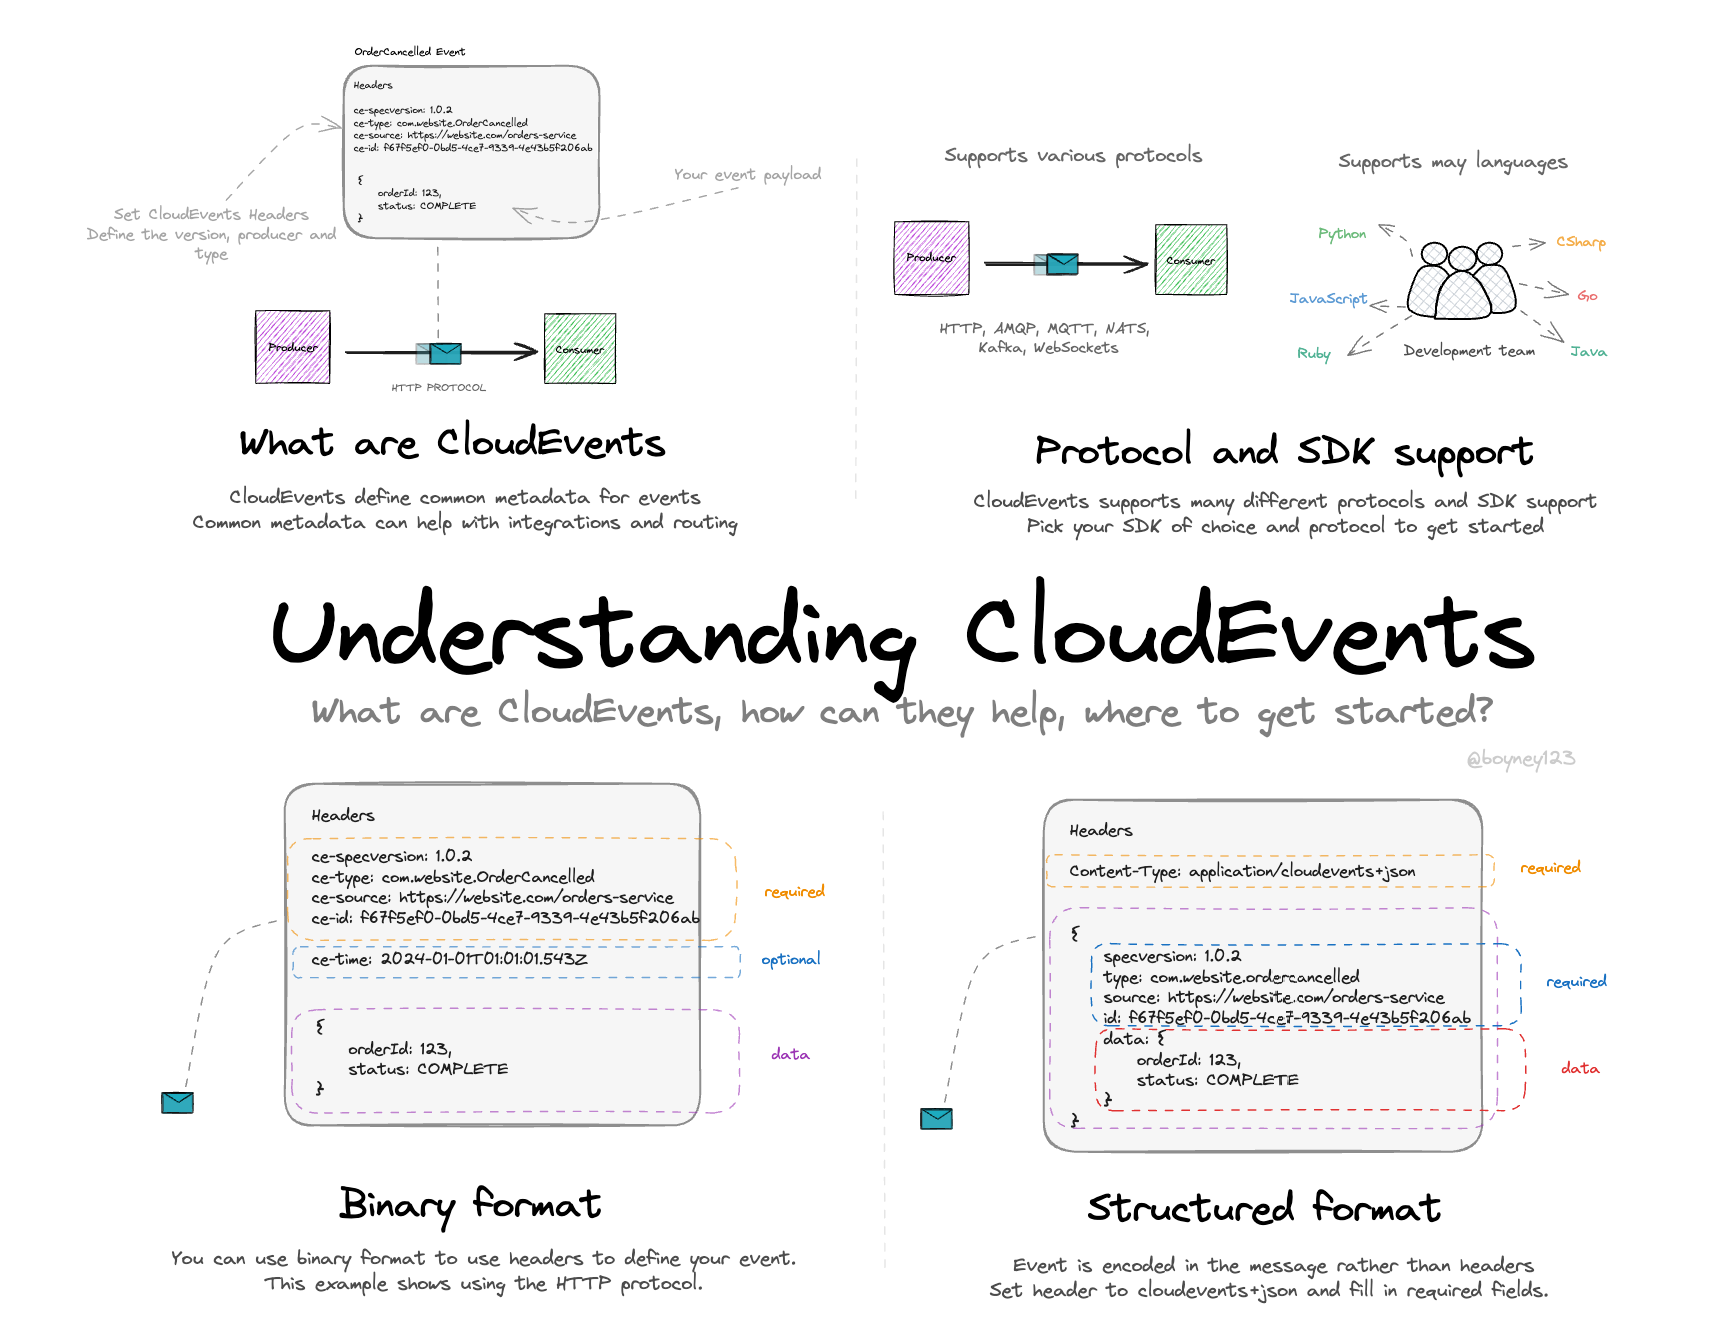 What are CloudEvents?